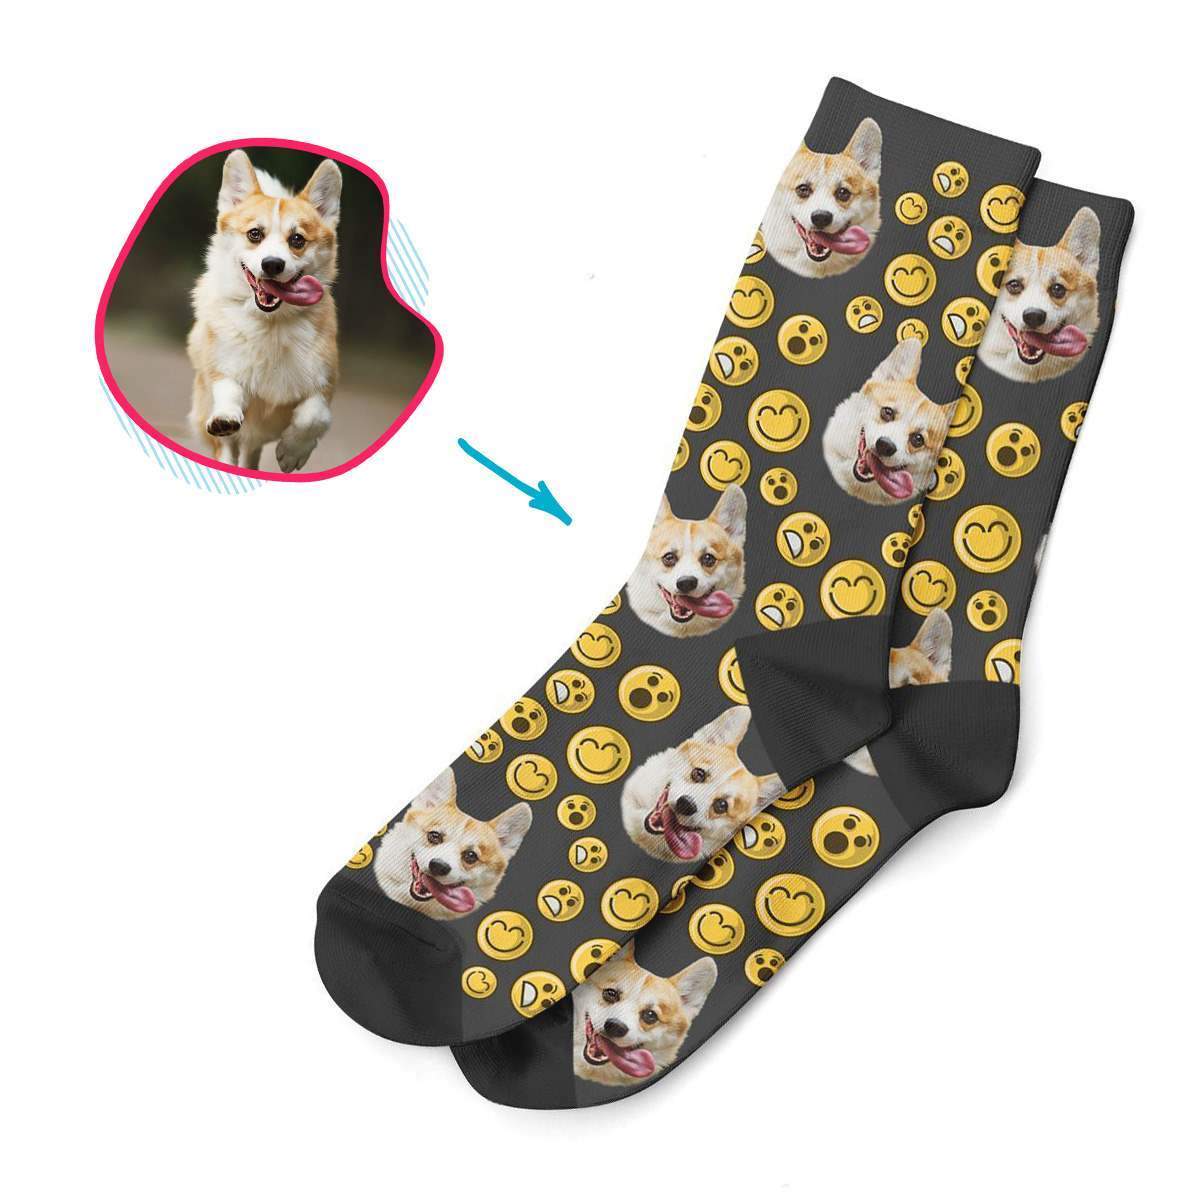 dark Smiles socks personalized with photo of face printed on them